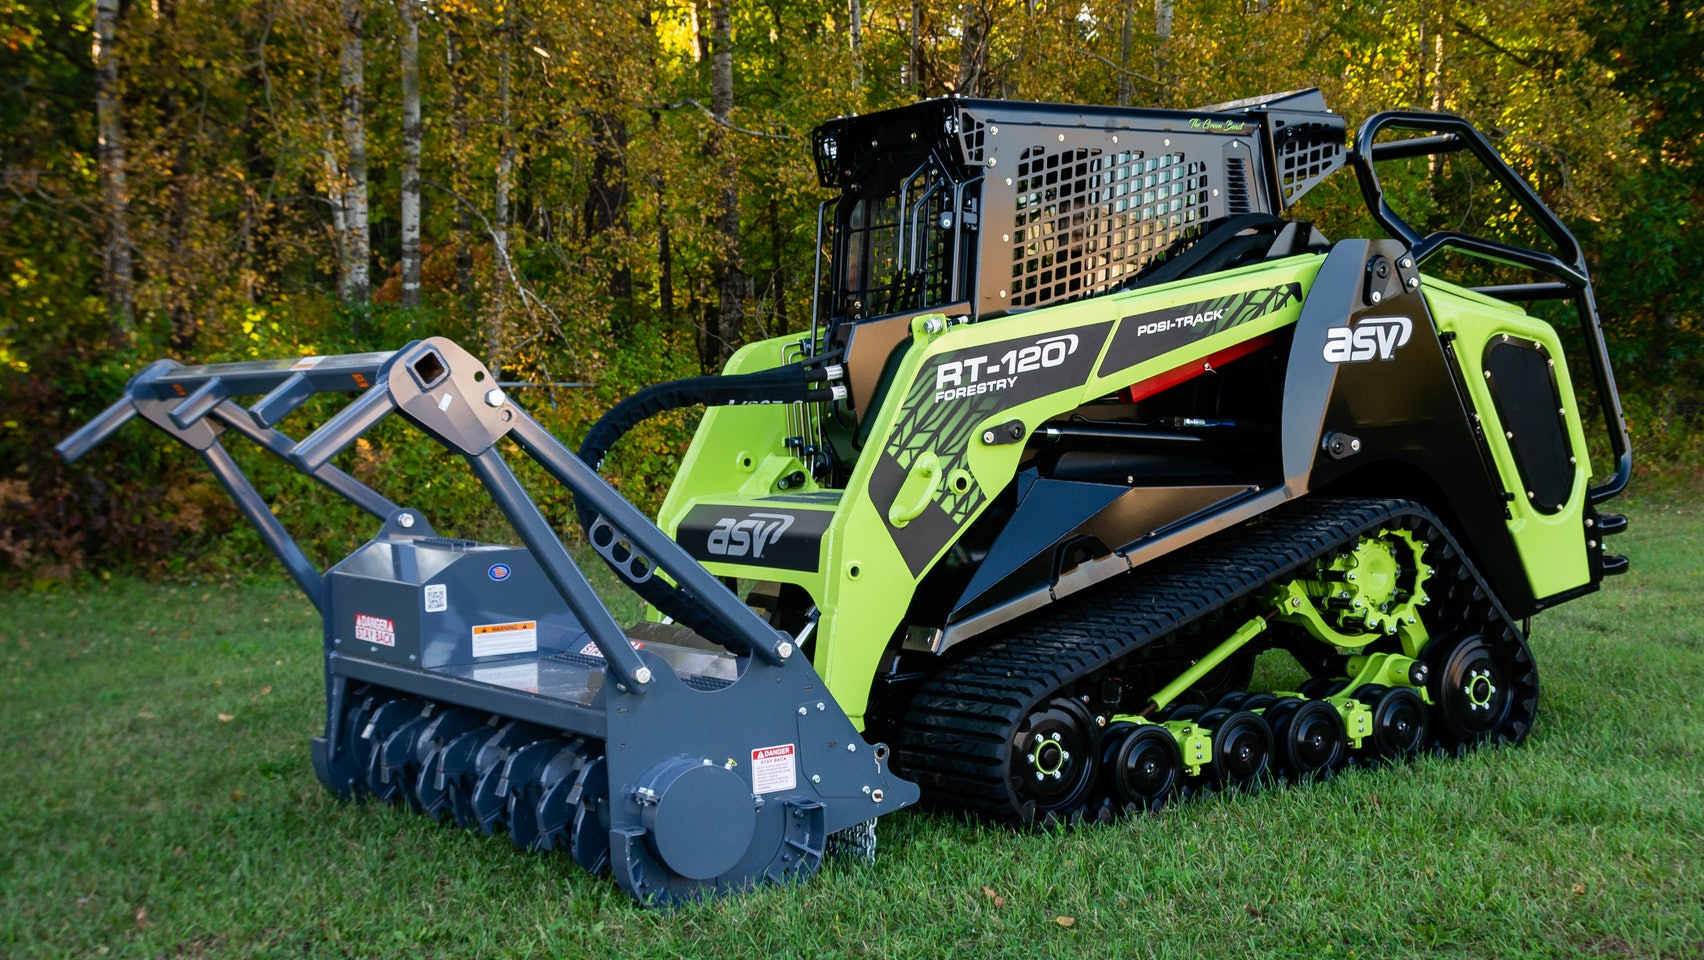 Asv Takes Green Seriously At Gie Expo 19 With Customized Loader For Construction Pros